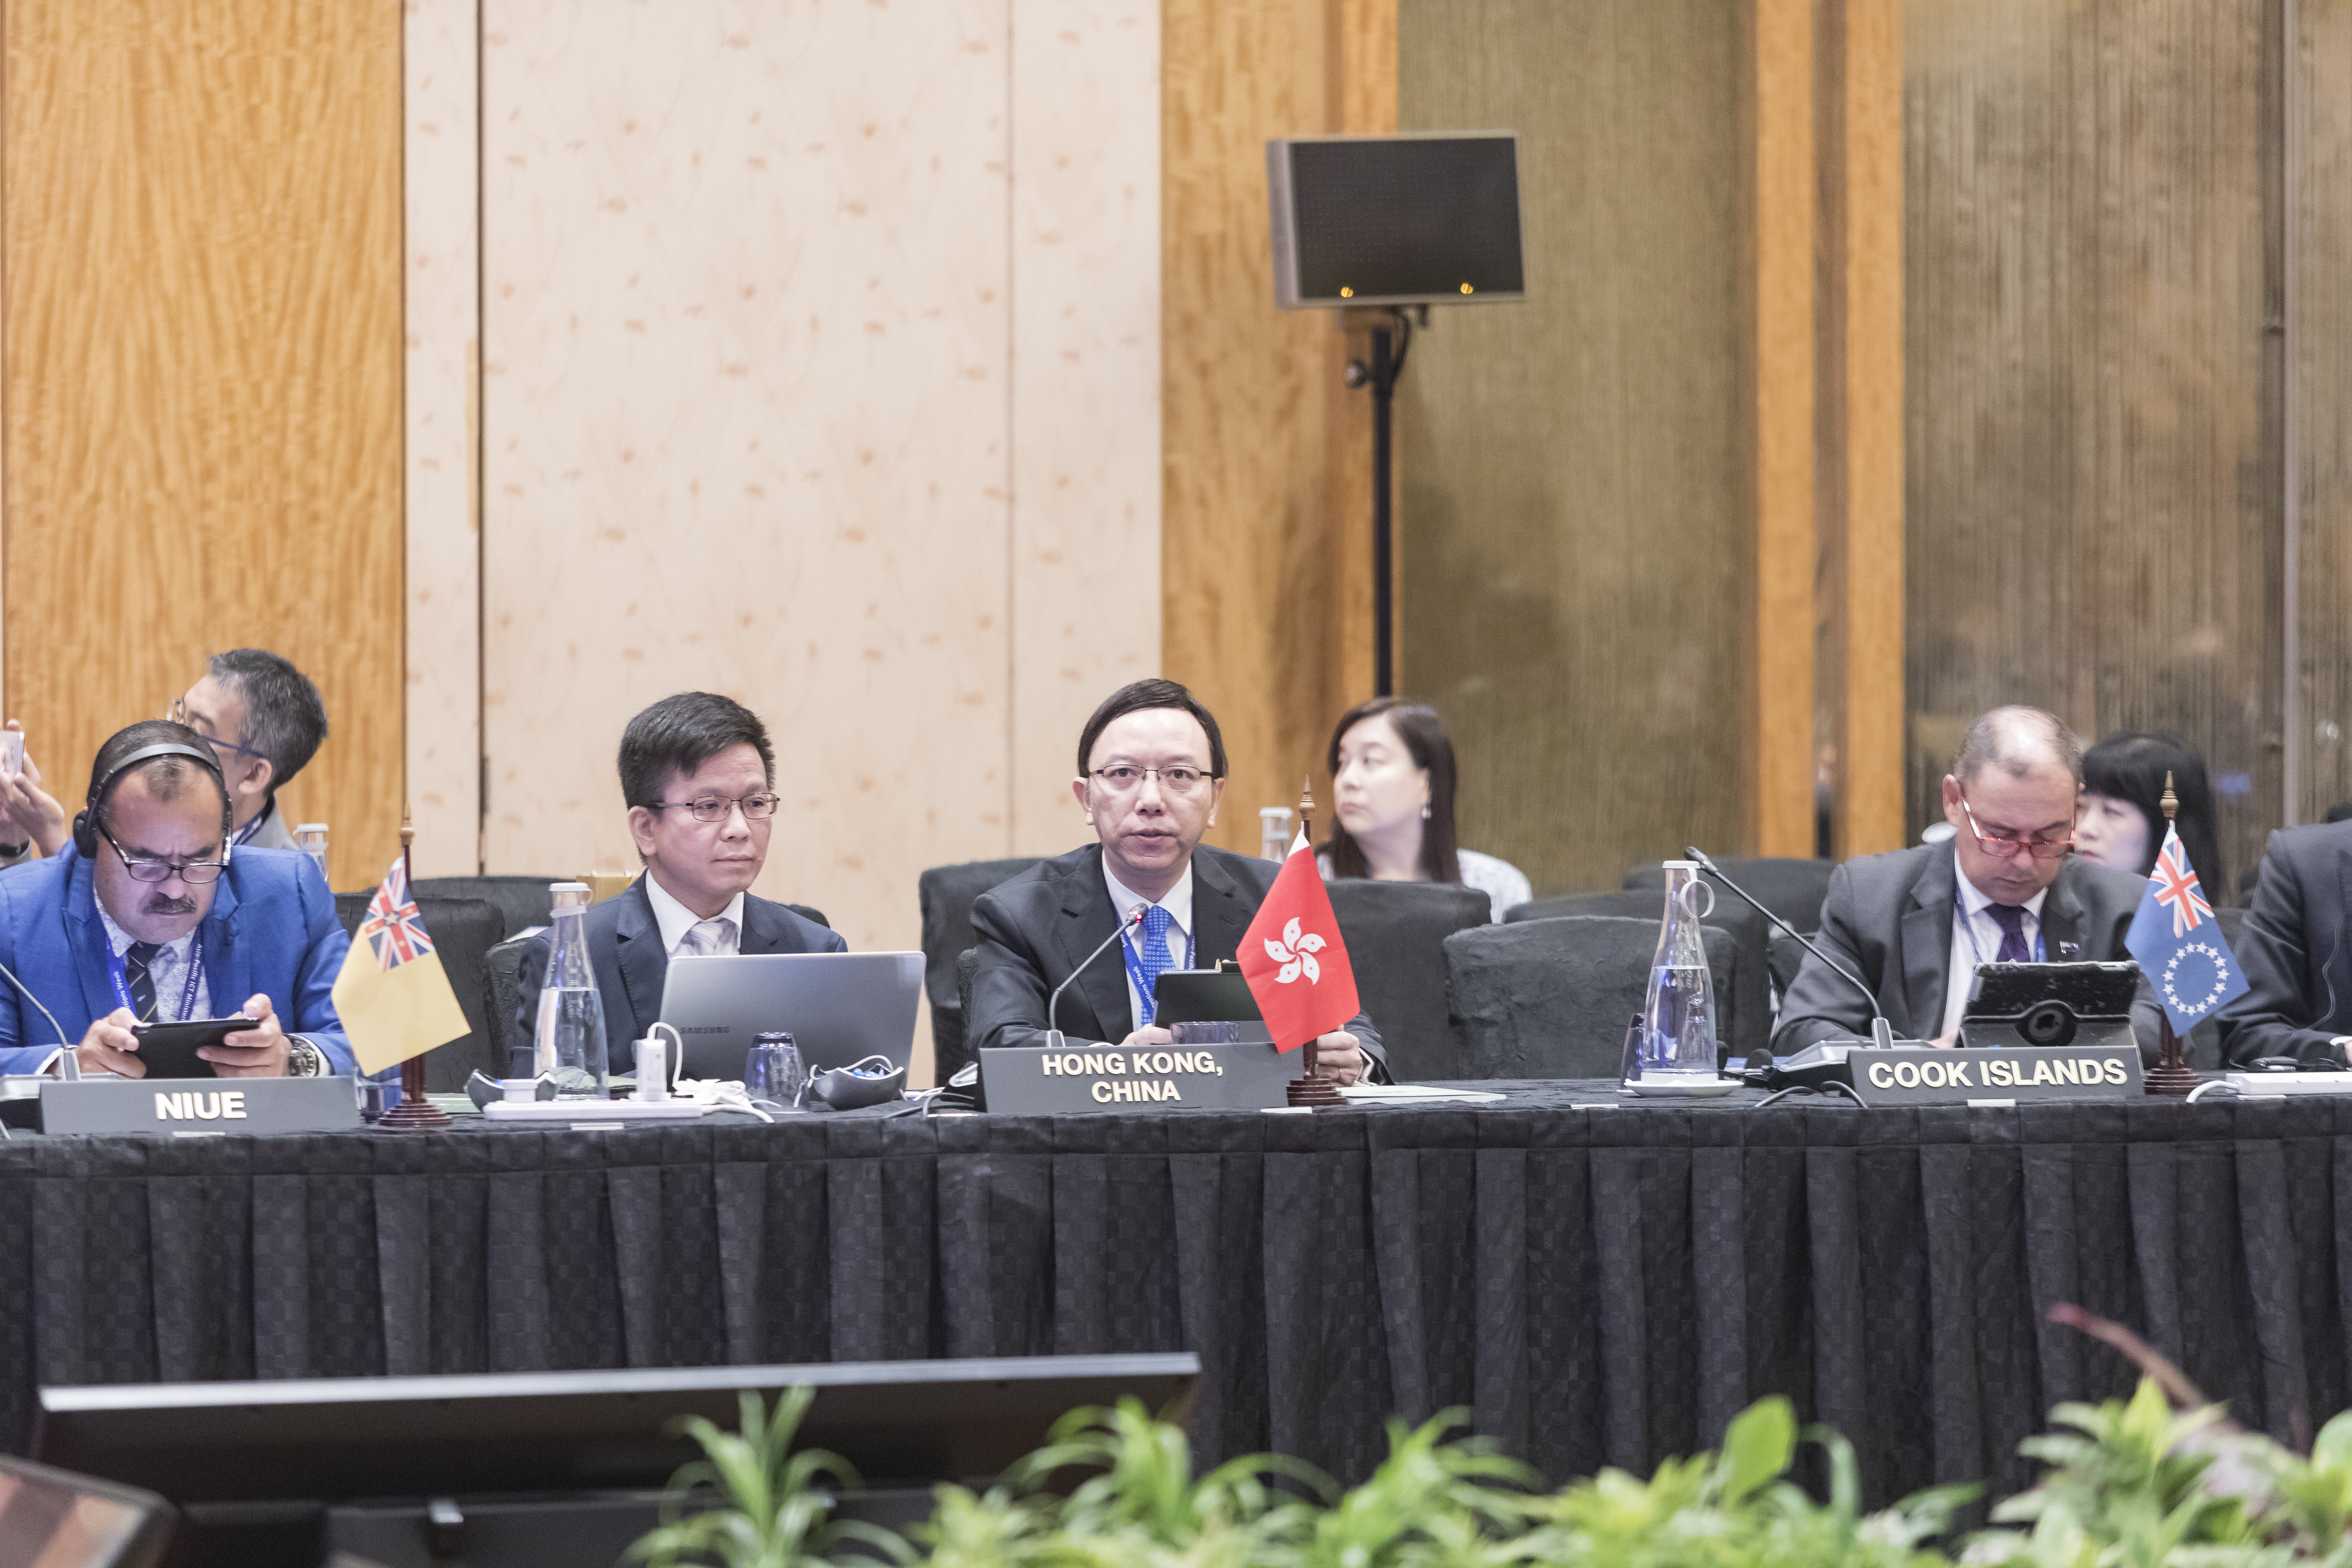 Mr. Victor Lam, Government Chief Information Officer (middle), delivers Hong Kong, China's Statement at the “Asia-Pacific ICT Ministerial Meeting 2019”.